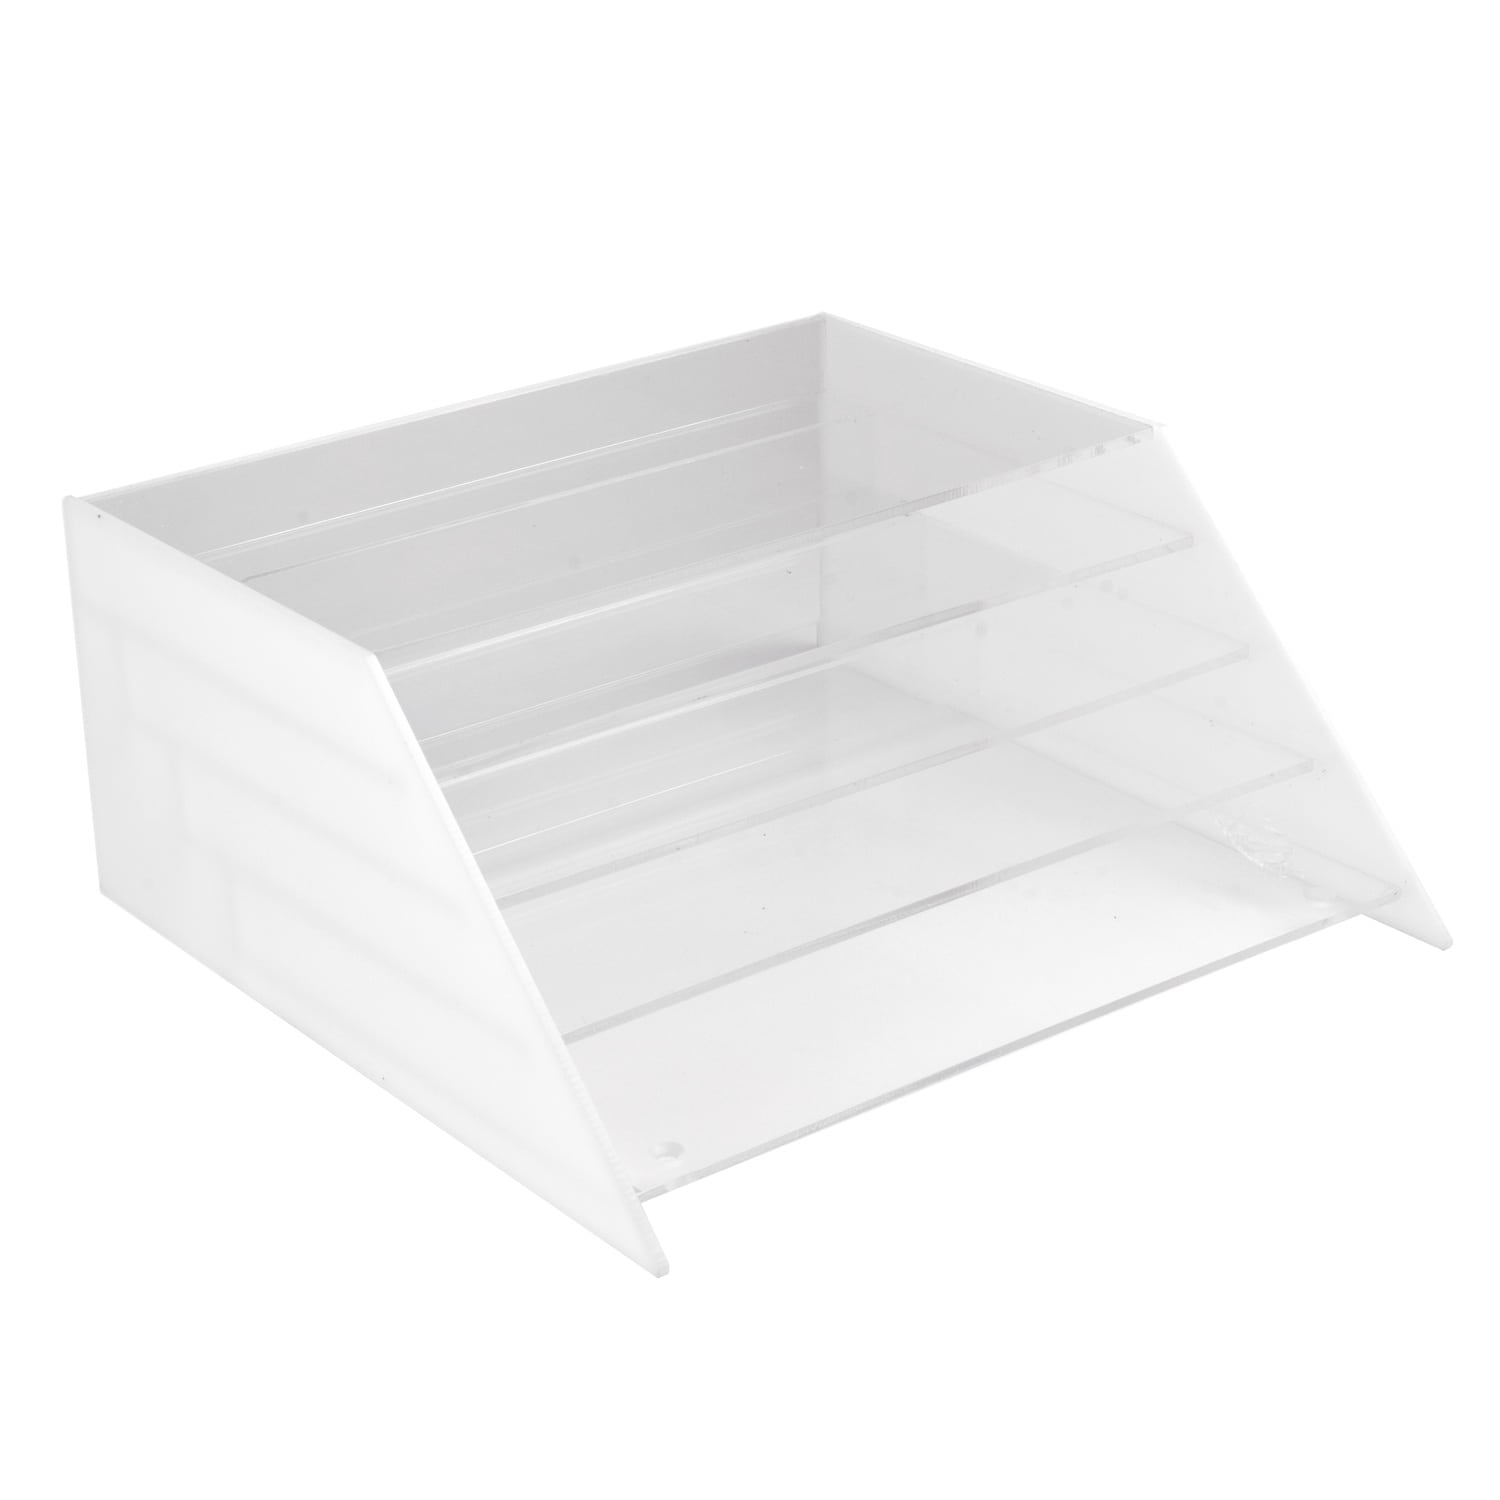 Document Tray For Standing Or Hanging